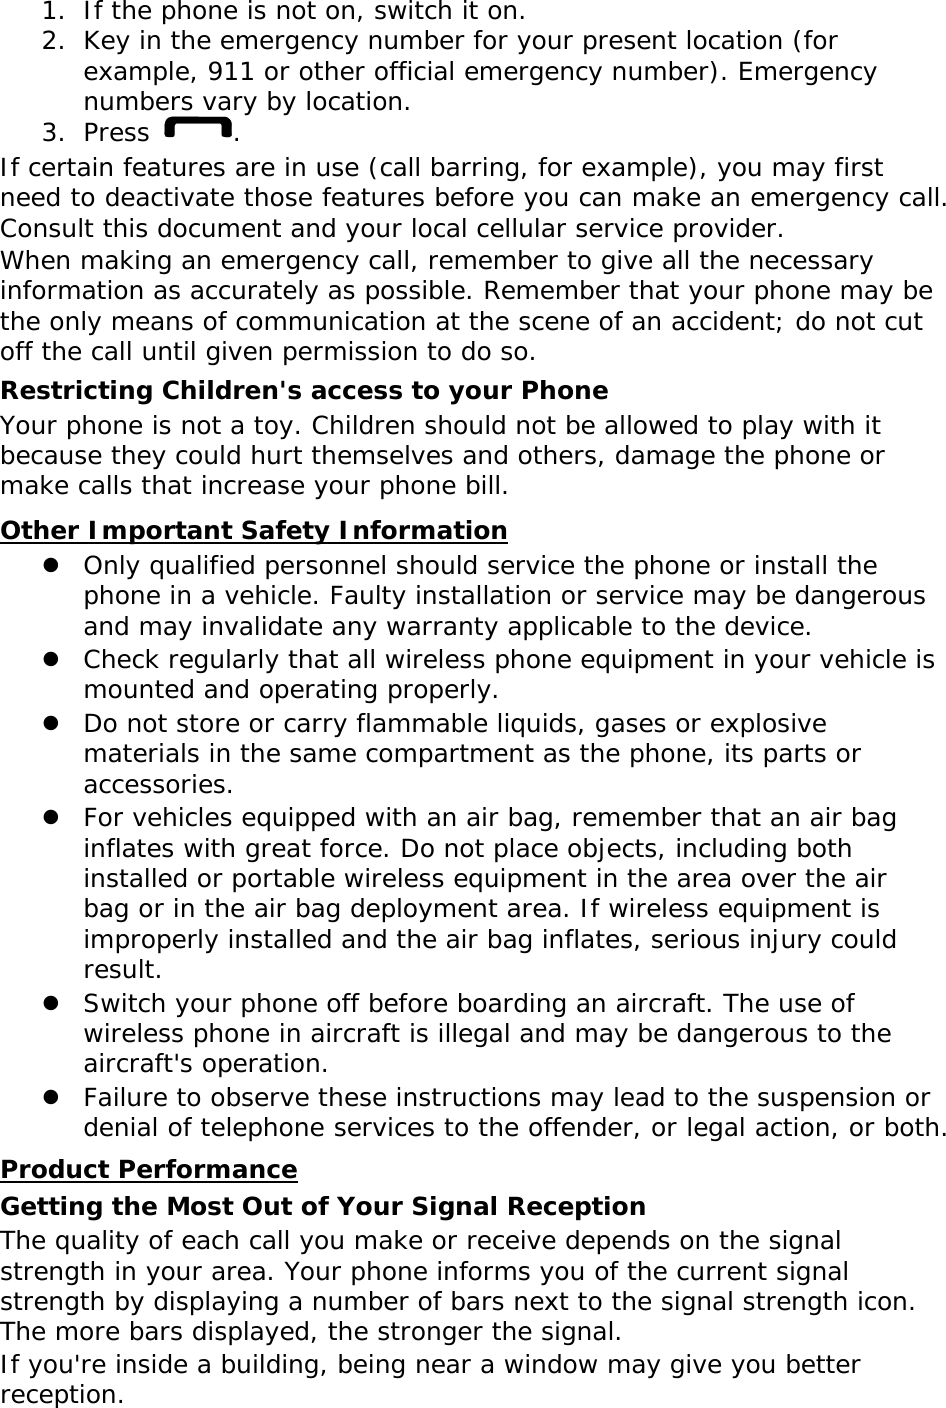 1. If the phone is not on, switch it on. 2. Key in the emergency number for your present location (for example, 911 or other official emergency number). Emergency numbers vary by location. 3. Press  . If certain features are in use (call barring, for example), you may first need to deactivate those features before you can make an emergency call. Consult this document and your local cellular service provider. When making an emergency call, remember to give all the necessary information as accurately as possible. Remember that your phone may be the only means of communication at the scene of an accident; do not cut off the call until given permission to do so. Restricting Children&apos;s access to your Phone Your phone is not a toy. Children should not be allowed to play with it because they could hurt themselves and others, damage the phone or make calls that increase your phone bill. UOther Important Safety Information  Only qualified personnel should service the phone or install the phone in a vehicle. Faulty installation or service may be dangerous and may invalidate any warranty applicable to the device.  Check regularly that all wireless phone equipment in your vehicle is mounted and operating properly.  Do not store or carry flammable liquids, gases or explosive materials in the same compartment as the phone, its parts or accessories.  For vehicles equipped with an air bag, remember that an air bag inflates with great force. Do not place objects, including both installed or portable wireless equipment in the area over the air bag or in the air bag deployment area. If wireless equipment is improperly installed and the air bag inflates, serious injury could result.  Switch your phone off before boarding an aircraft. The use of wireless phone in aircraft is illegal and may be dangerous to the aircraft&apos;s operation.  Failure to observe these instructions may lead to the suspension or denial of telephone services to the offender, or legal action, or both. UProduct Performance Getting the Most Out of Your Signal Reception The quality of each call you make or receive depends on the signal strength in your area. Your phone informs you of the current signal strength by displaying a number of bars next to the signal strength icon. The more bars displayed, the stronger the signal. If you&apos;re inside a building, being near a window may give you better reception. 